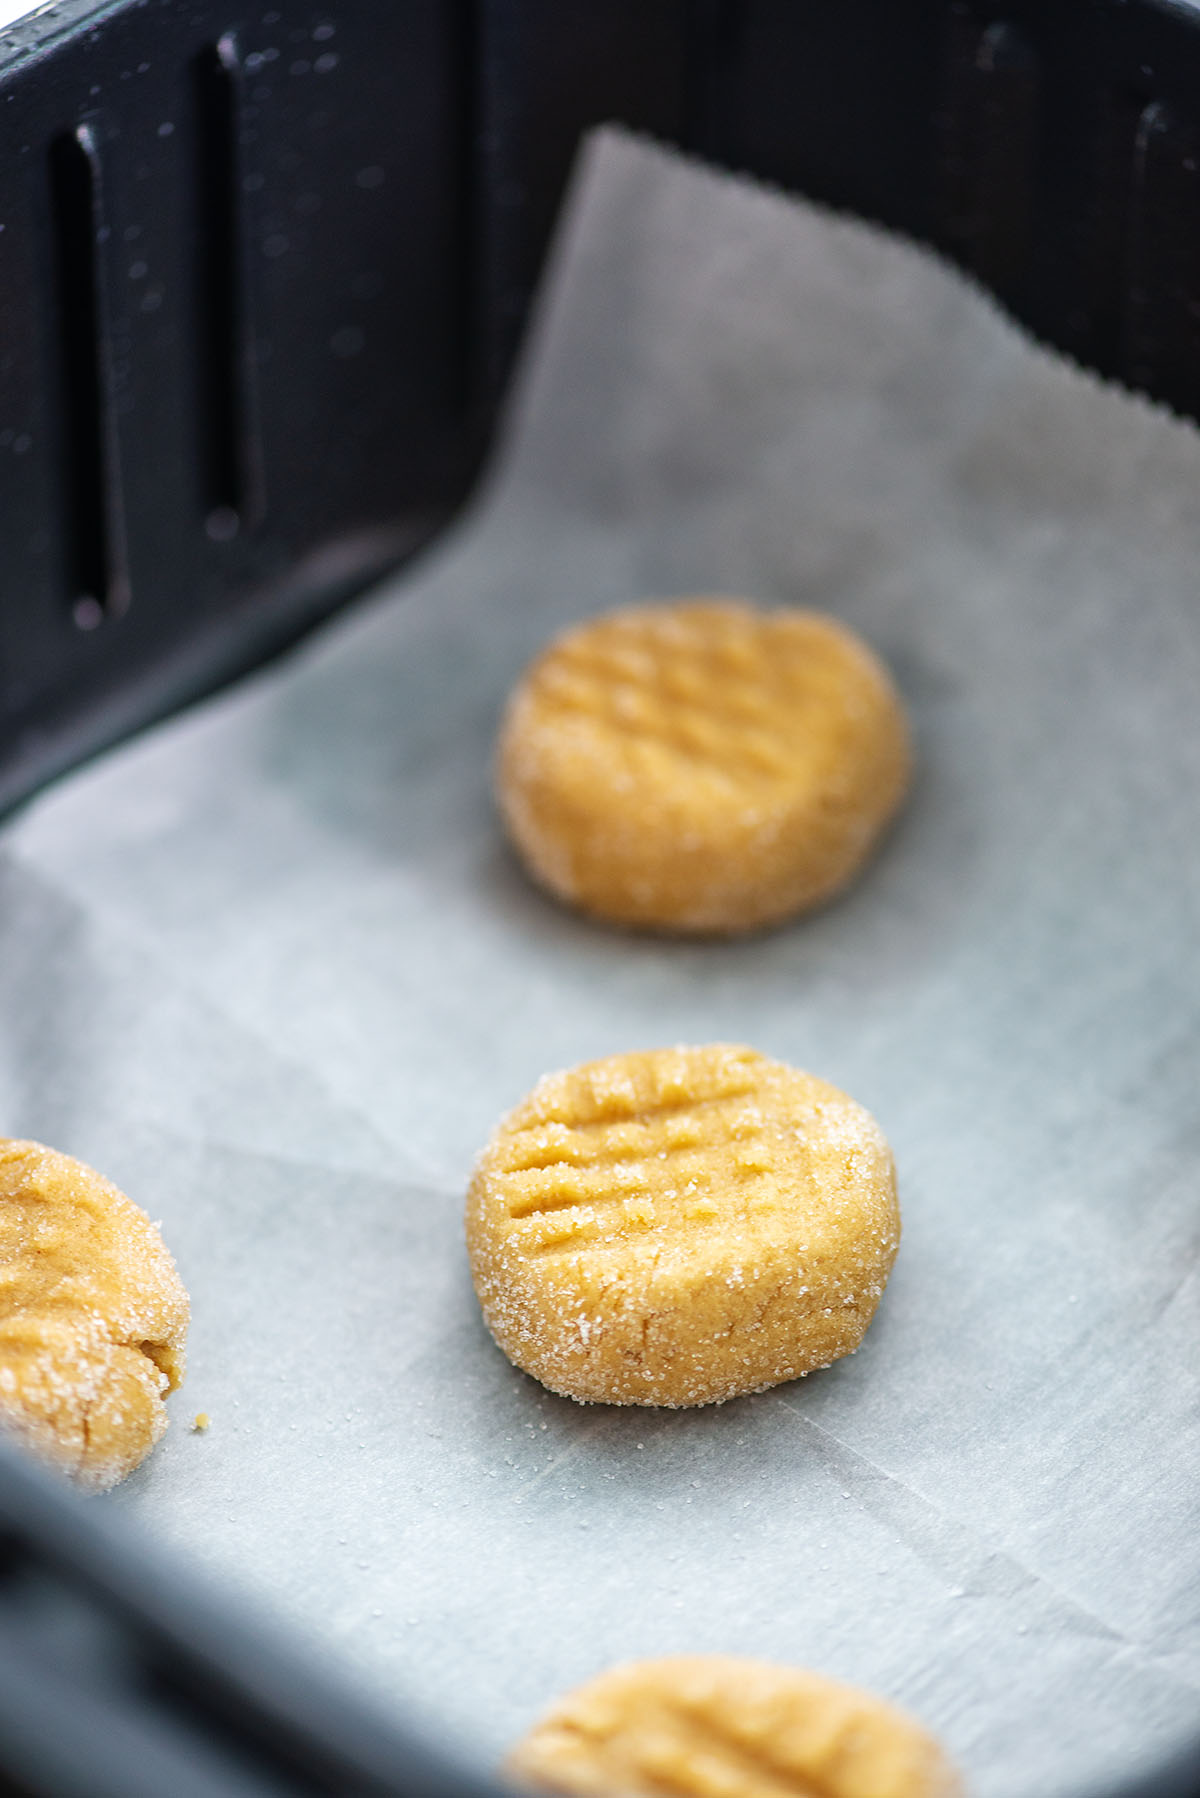 Several raw peanut butter cookies in an air fryer basket.